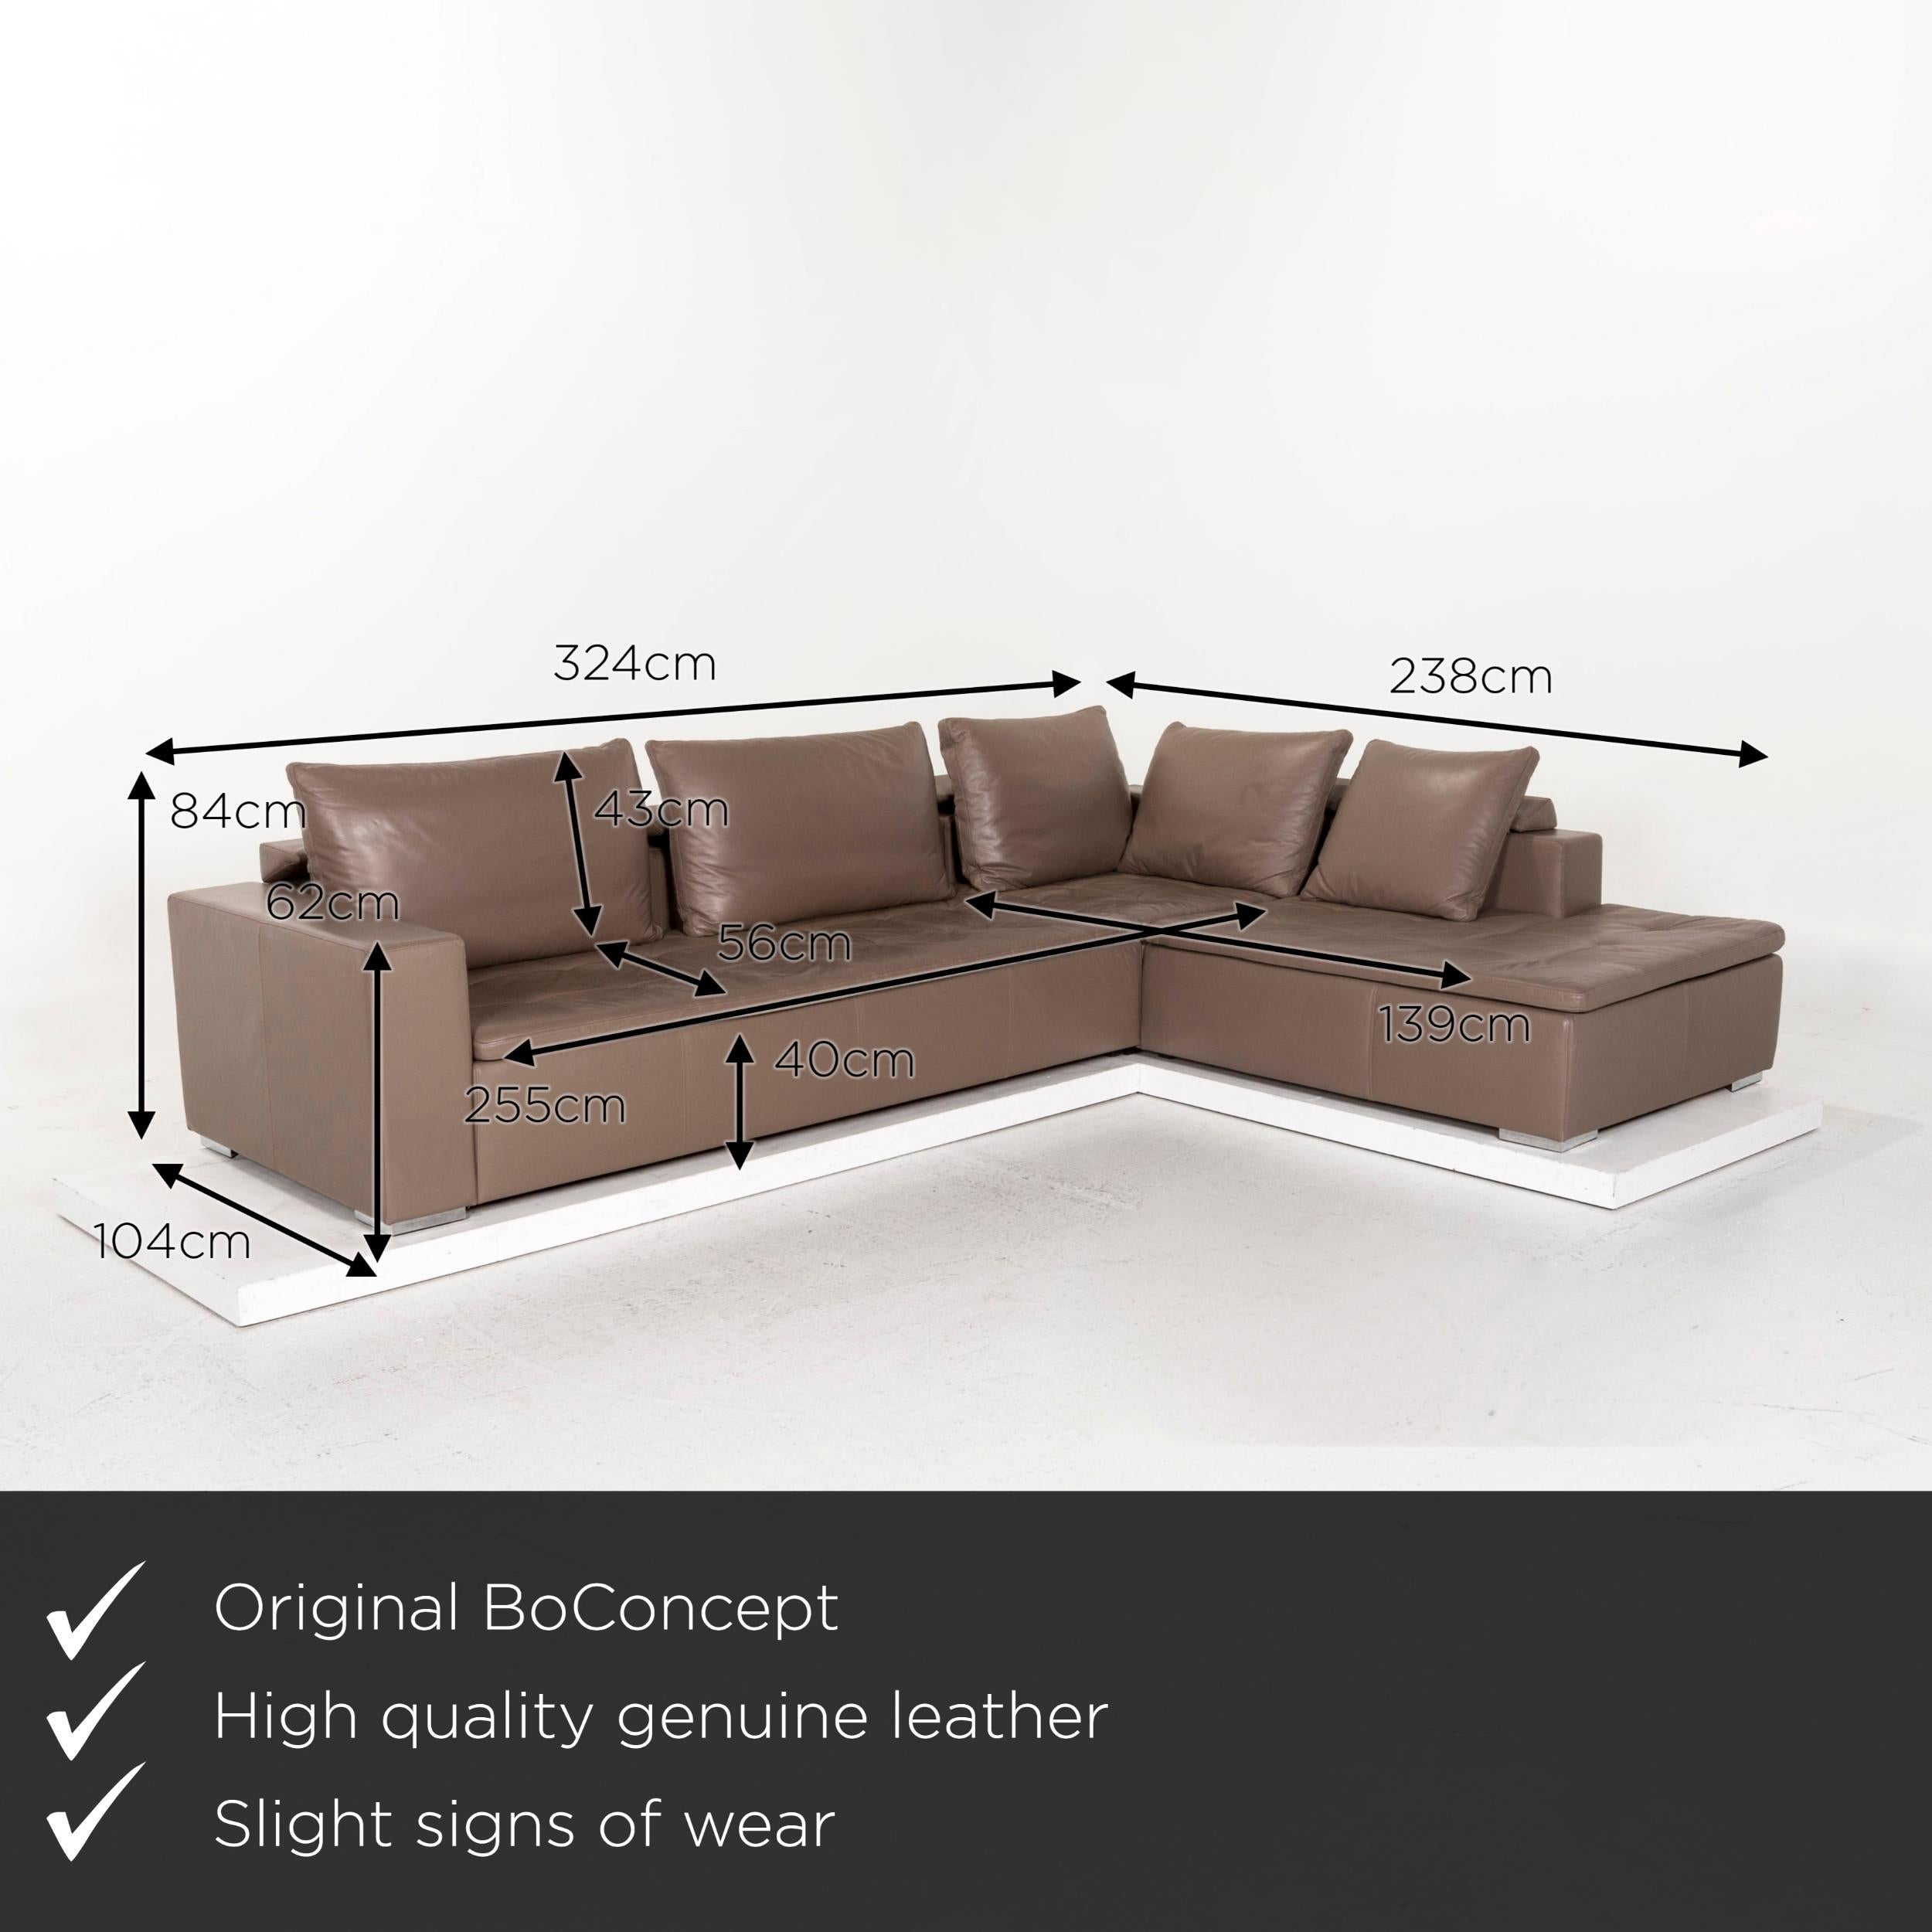 We present to you a BoConcept mezzo leather corner sofa brown gray-brown sofa couch.

 

 Product measurements in centimeters:
 

Depth 104
Width 324
Height 84
Seat height 40
Rest height 62
Seat depth 56
Seat width 255
Back height